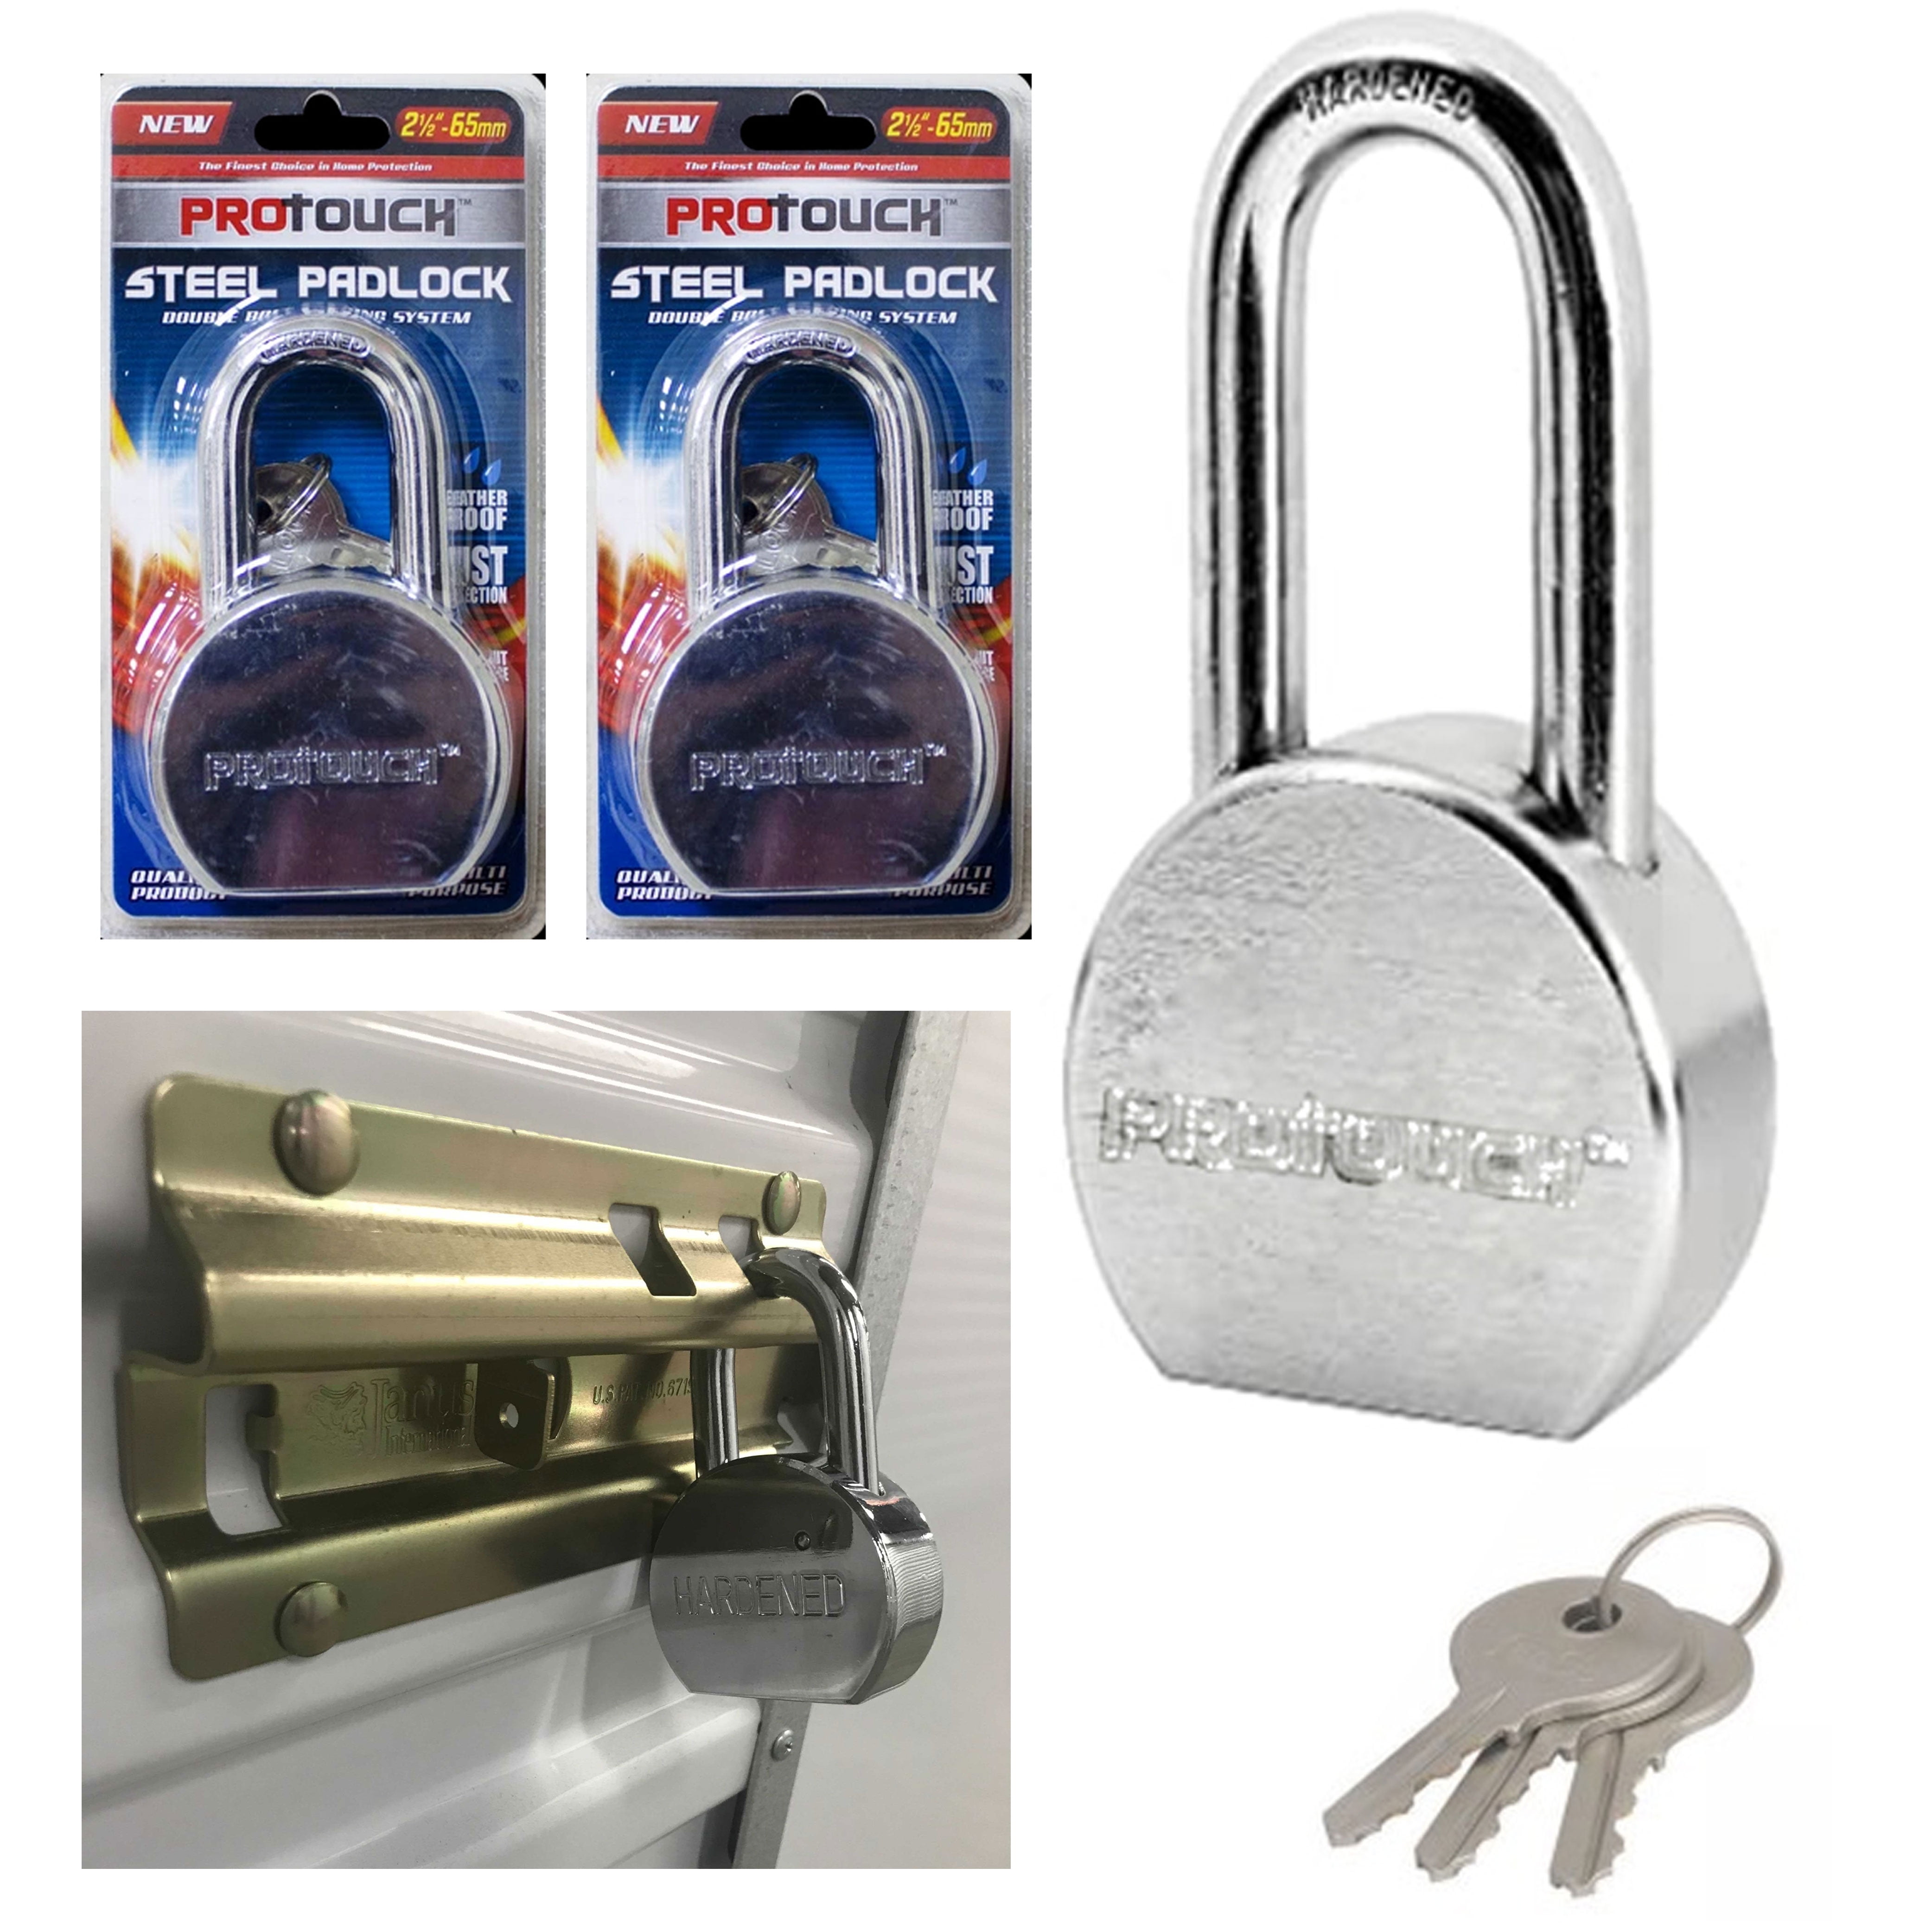 1 HASP BRAND NEW HEAVY DUTY SECURITY SET 1 DISCUS PADLOCK WITH 2 KEYS